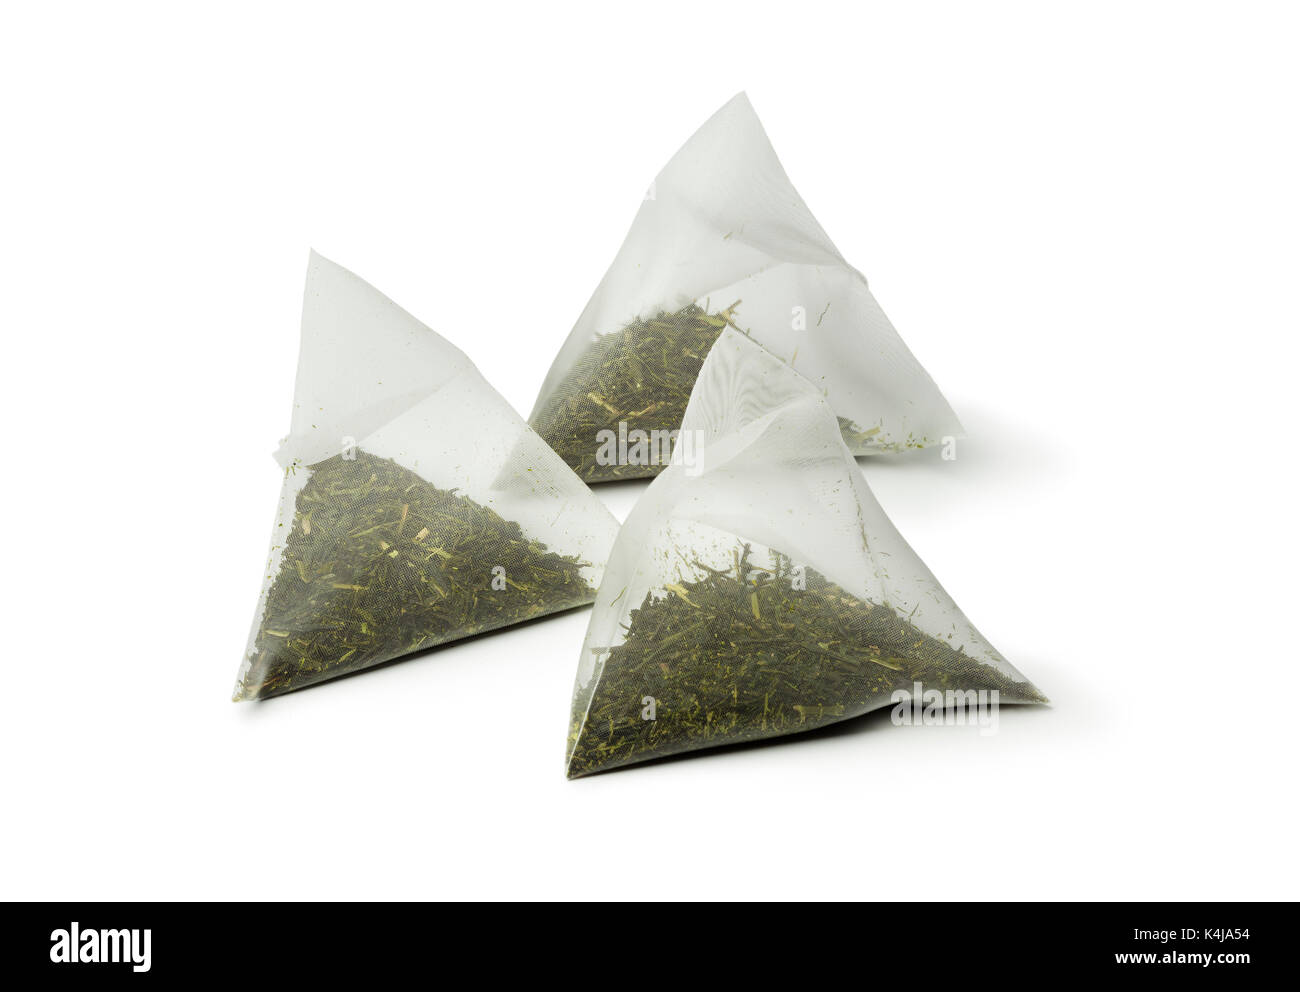 Triangle bags with matcha tea on white background Stock Photo